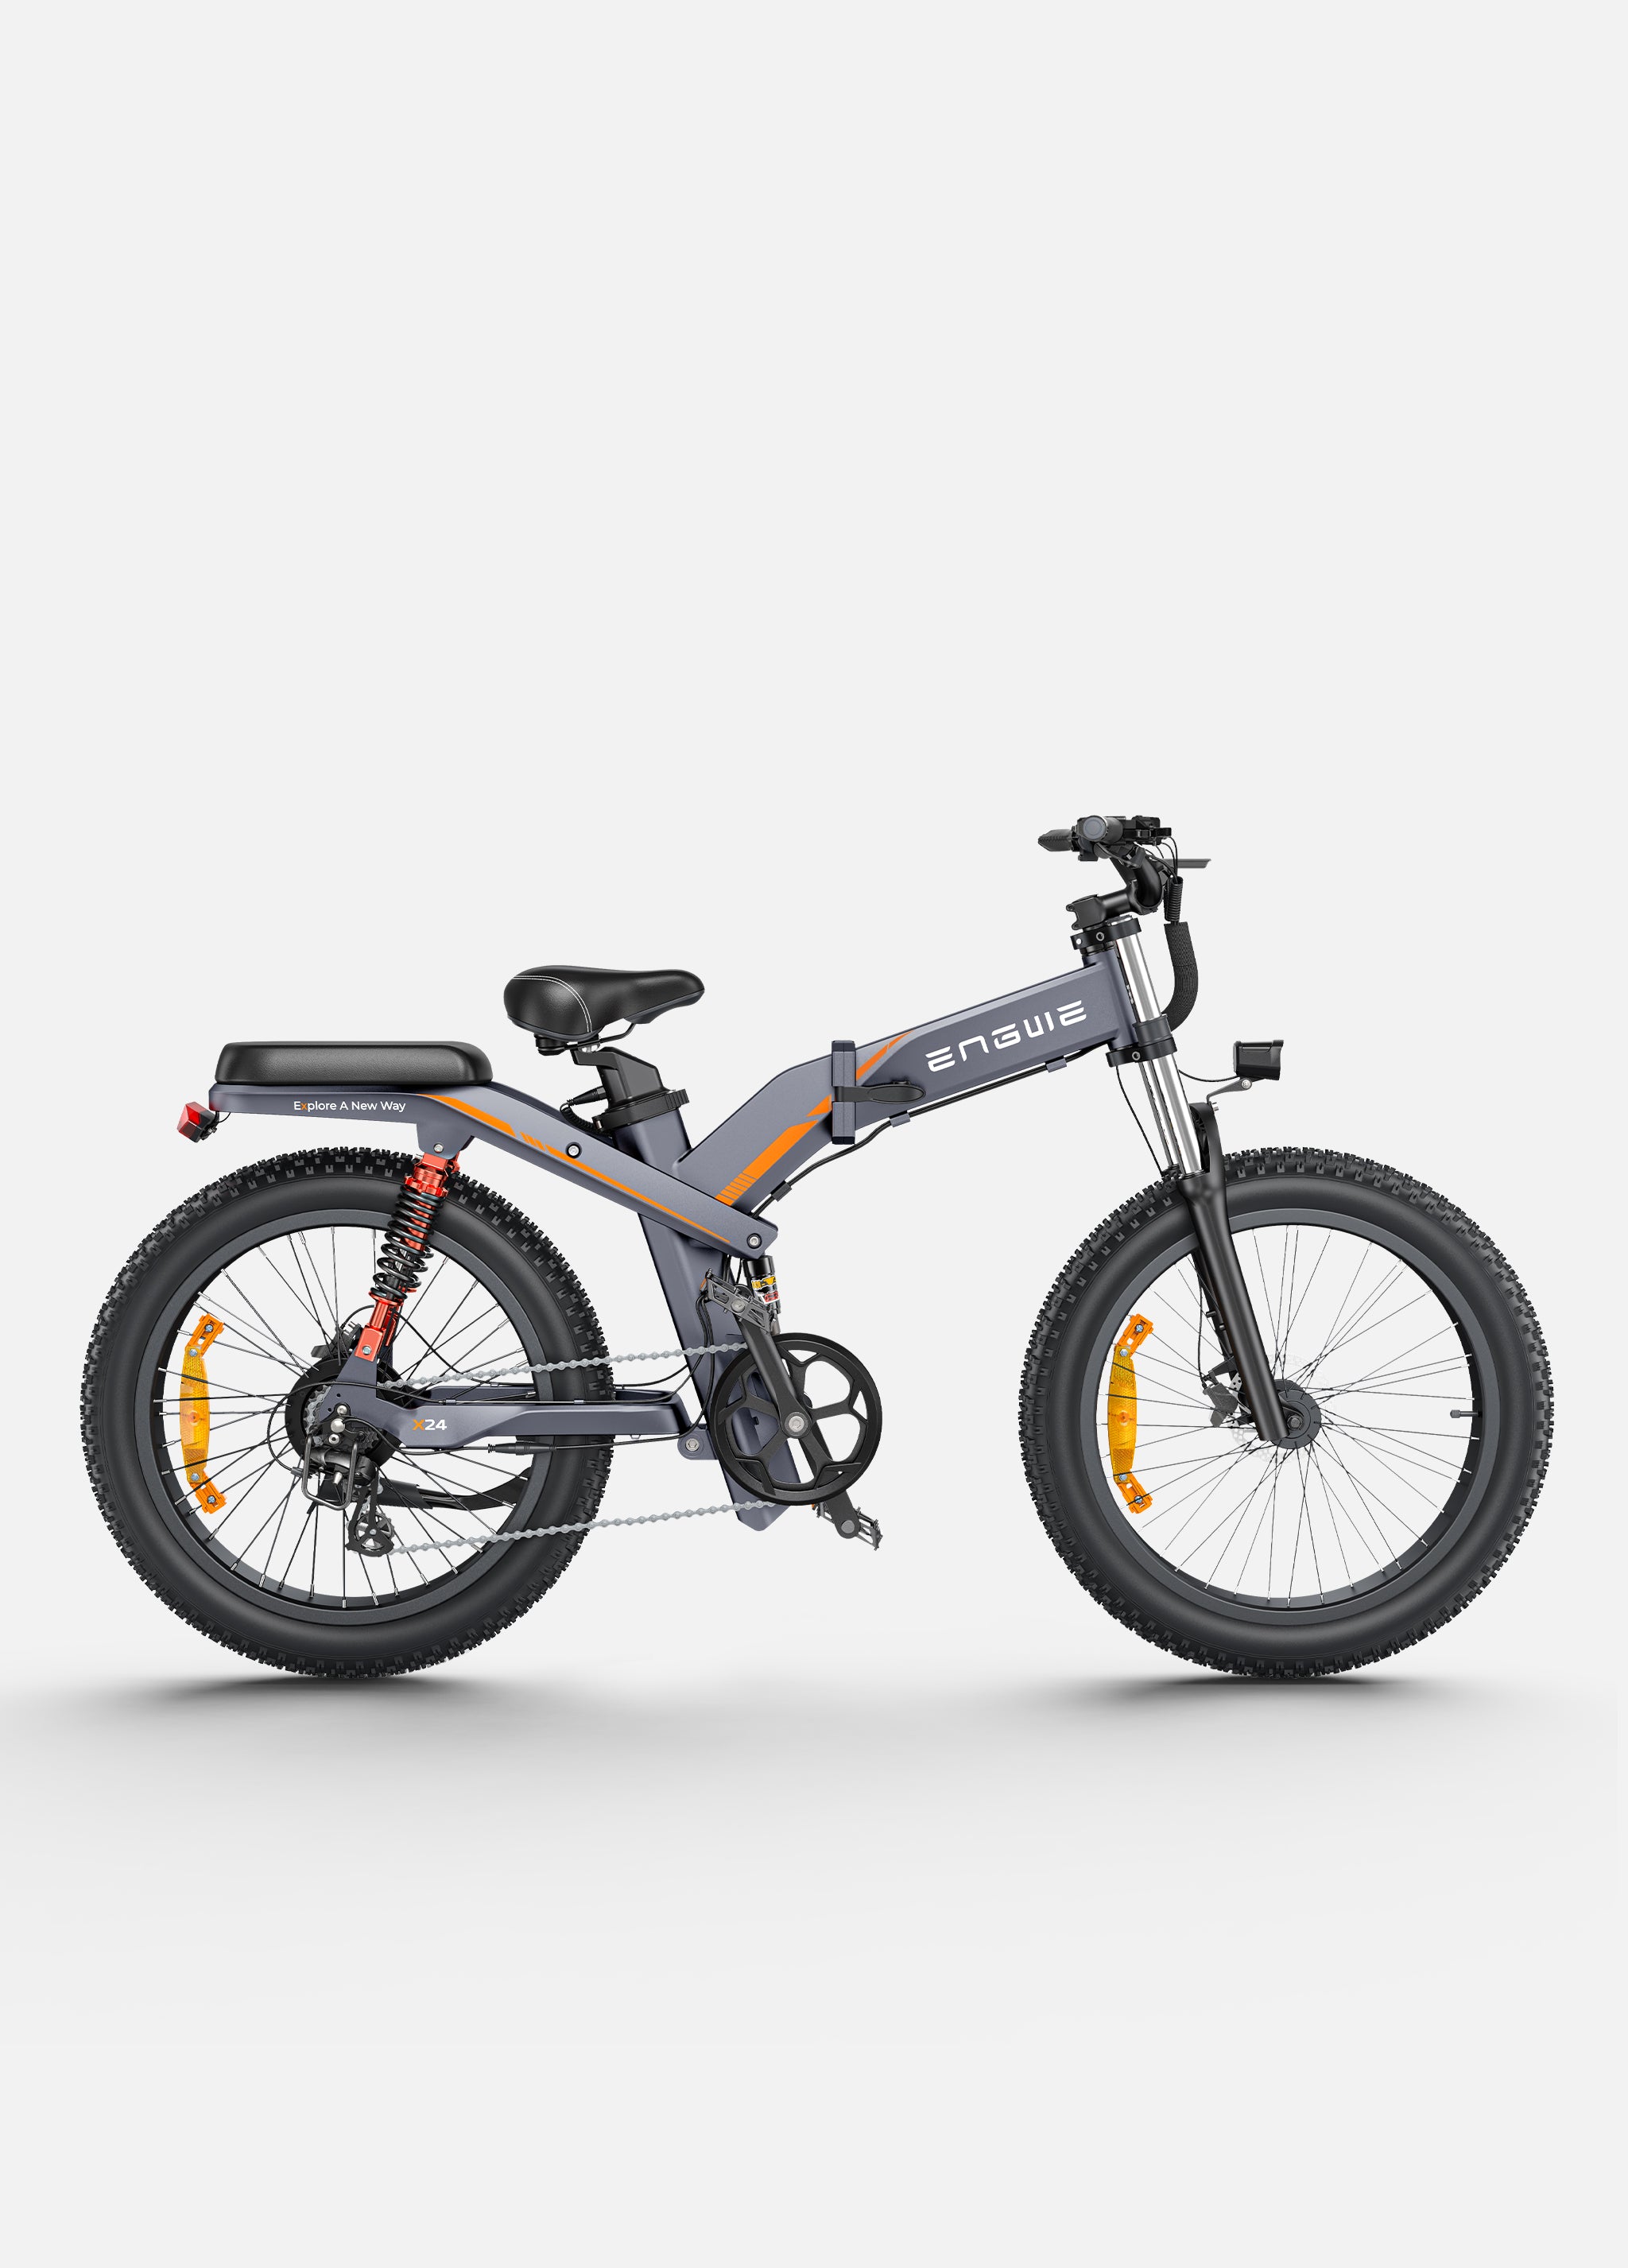 Engwe X26/X24/X20Foldable Electric Bike for Long Distance